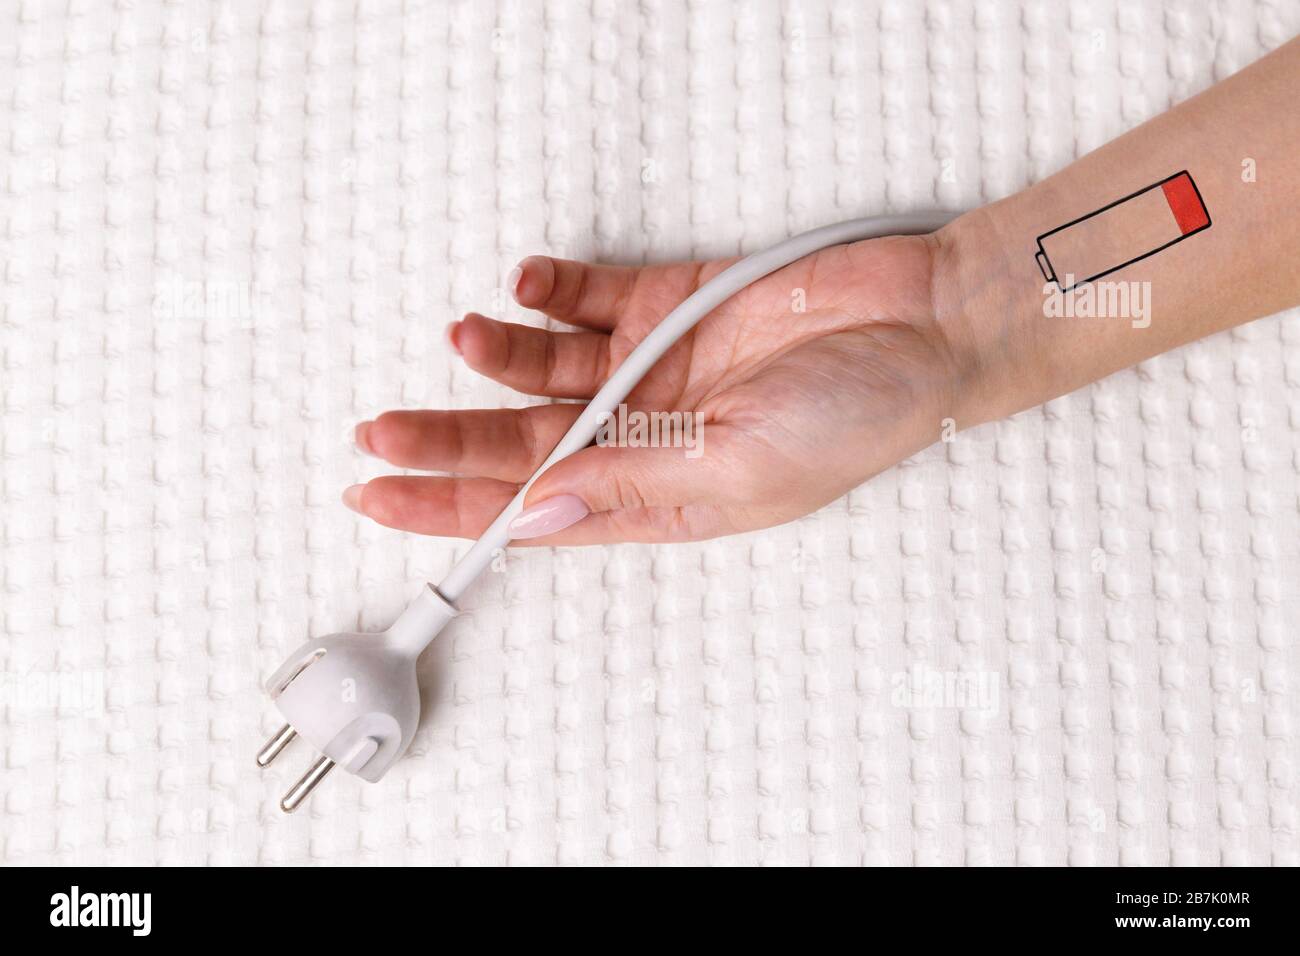 Low battery symbol drawn on human hand/wrist. Creative image of tired woman lying on bed and holding cable/white  electric plug. Overwork, exhausted, Stock Photo